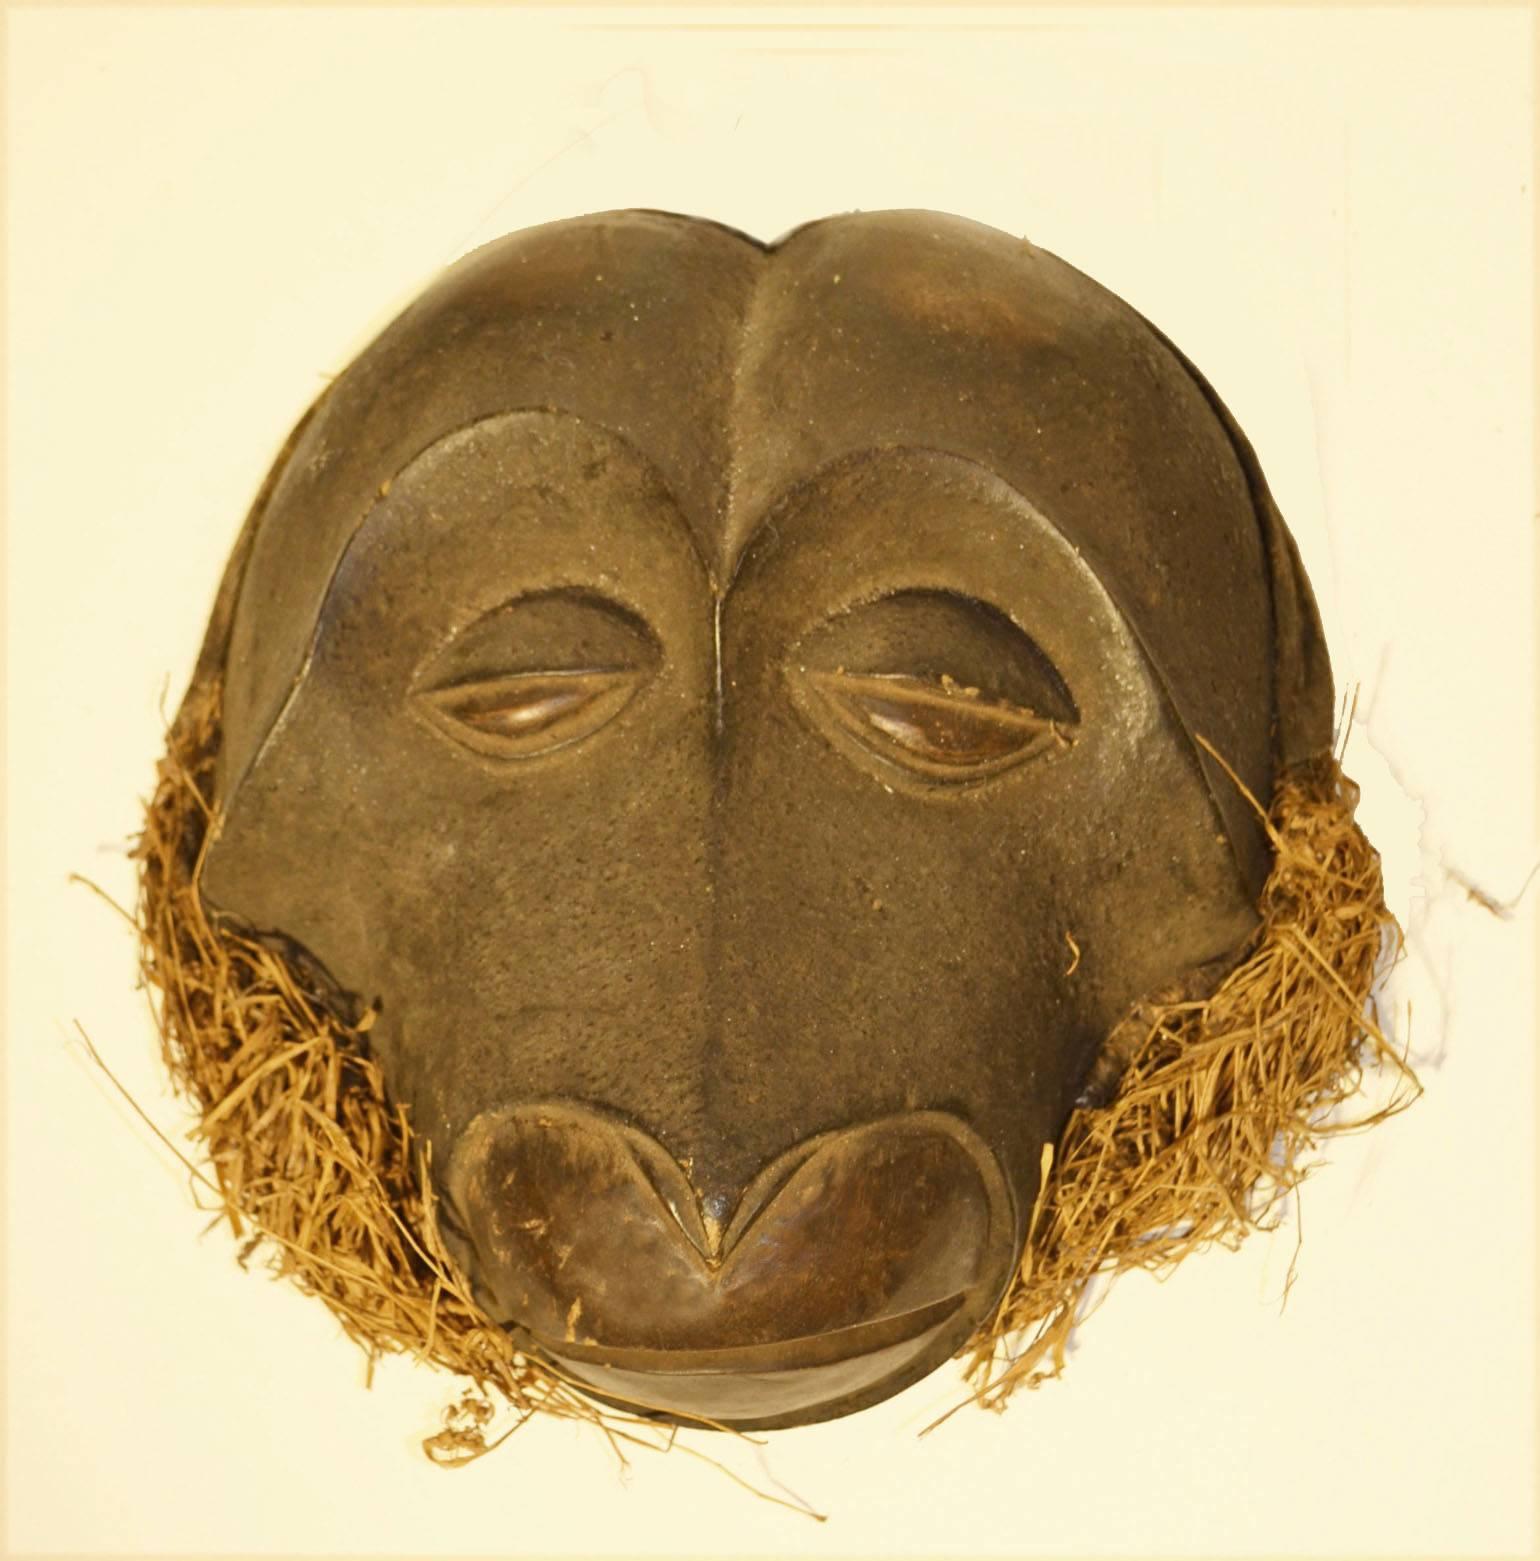 Tribal Pair of Sculptural African Monkey Masks Introducing  the Year of the Monkey